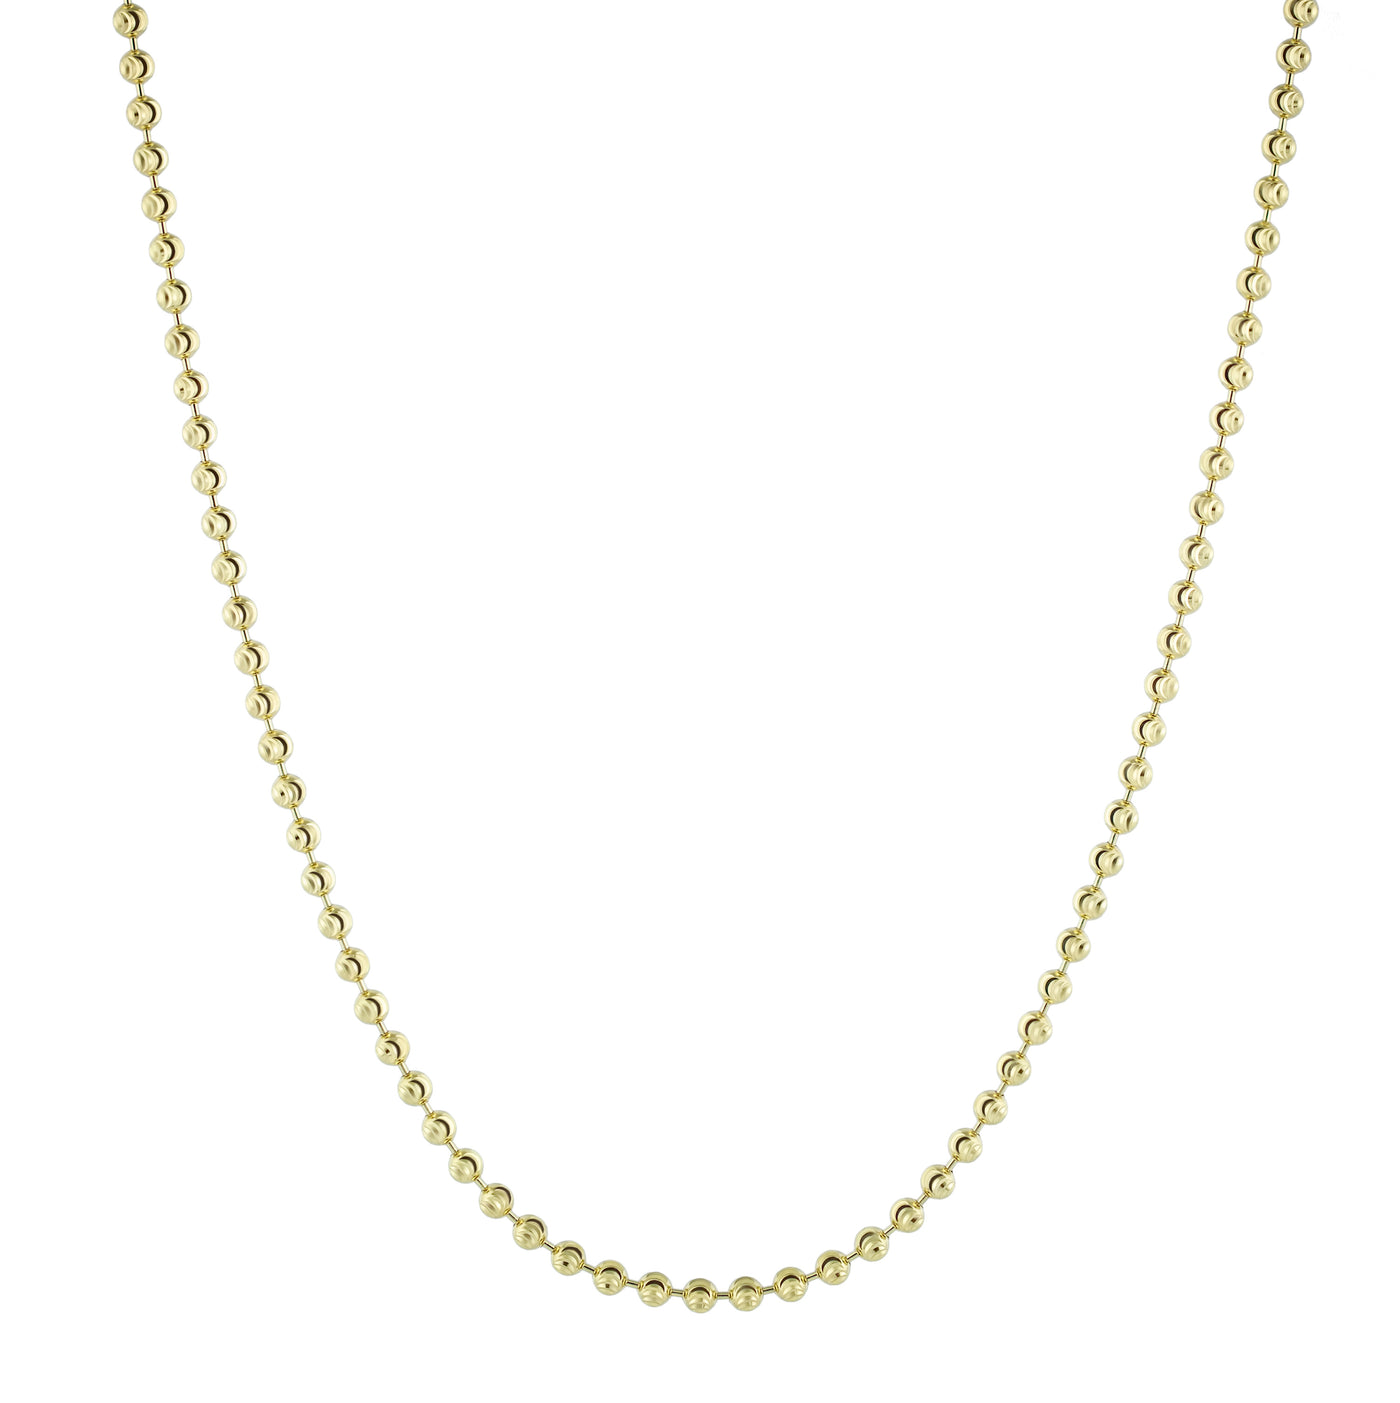 Bead Ball Moon Cut Link Chain Necklace 10K & 14K Yellow Gold